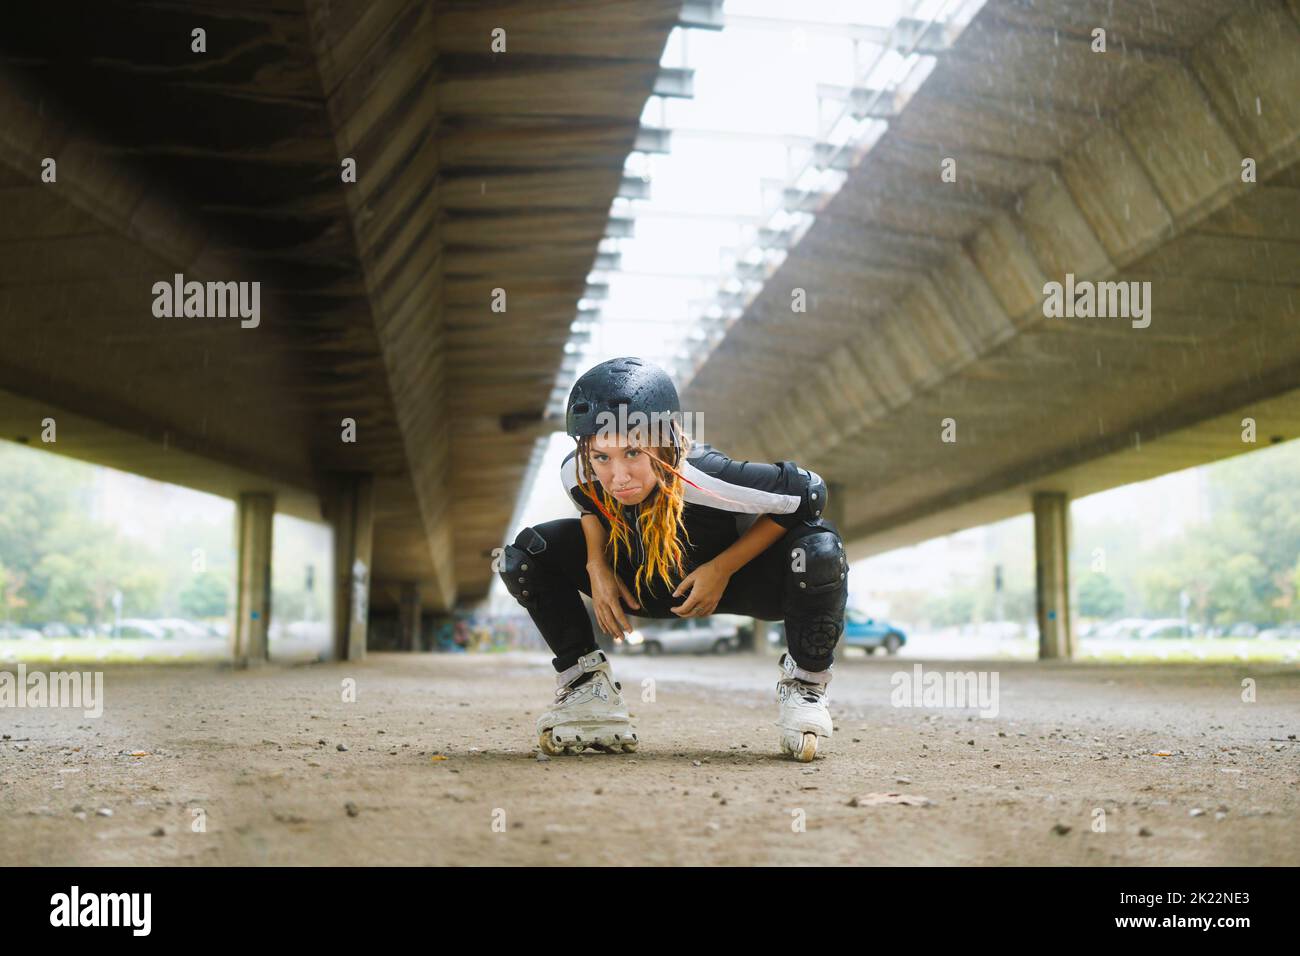 Young active woman wearing roller blades and protection gear Stock Photo